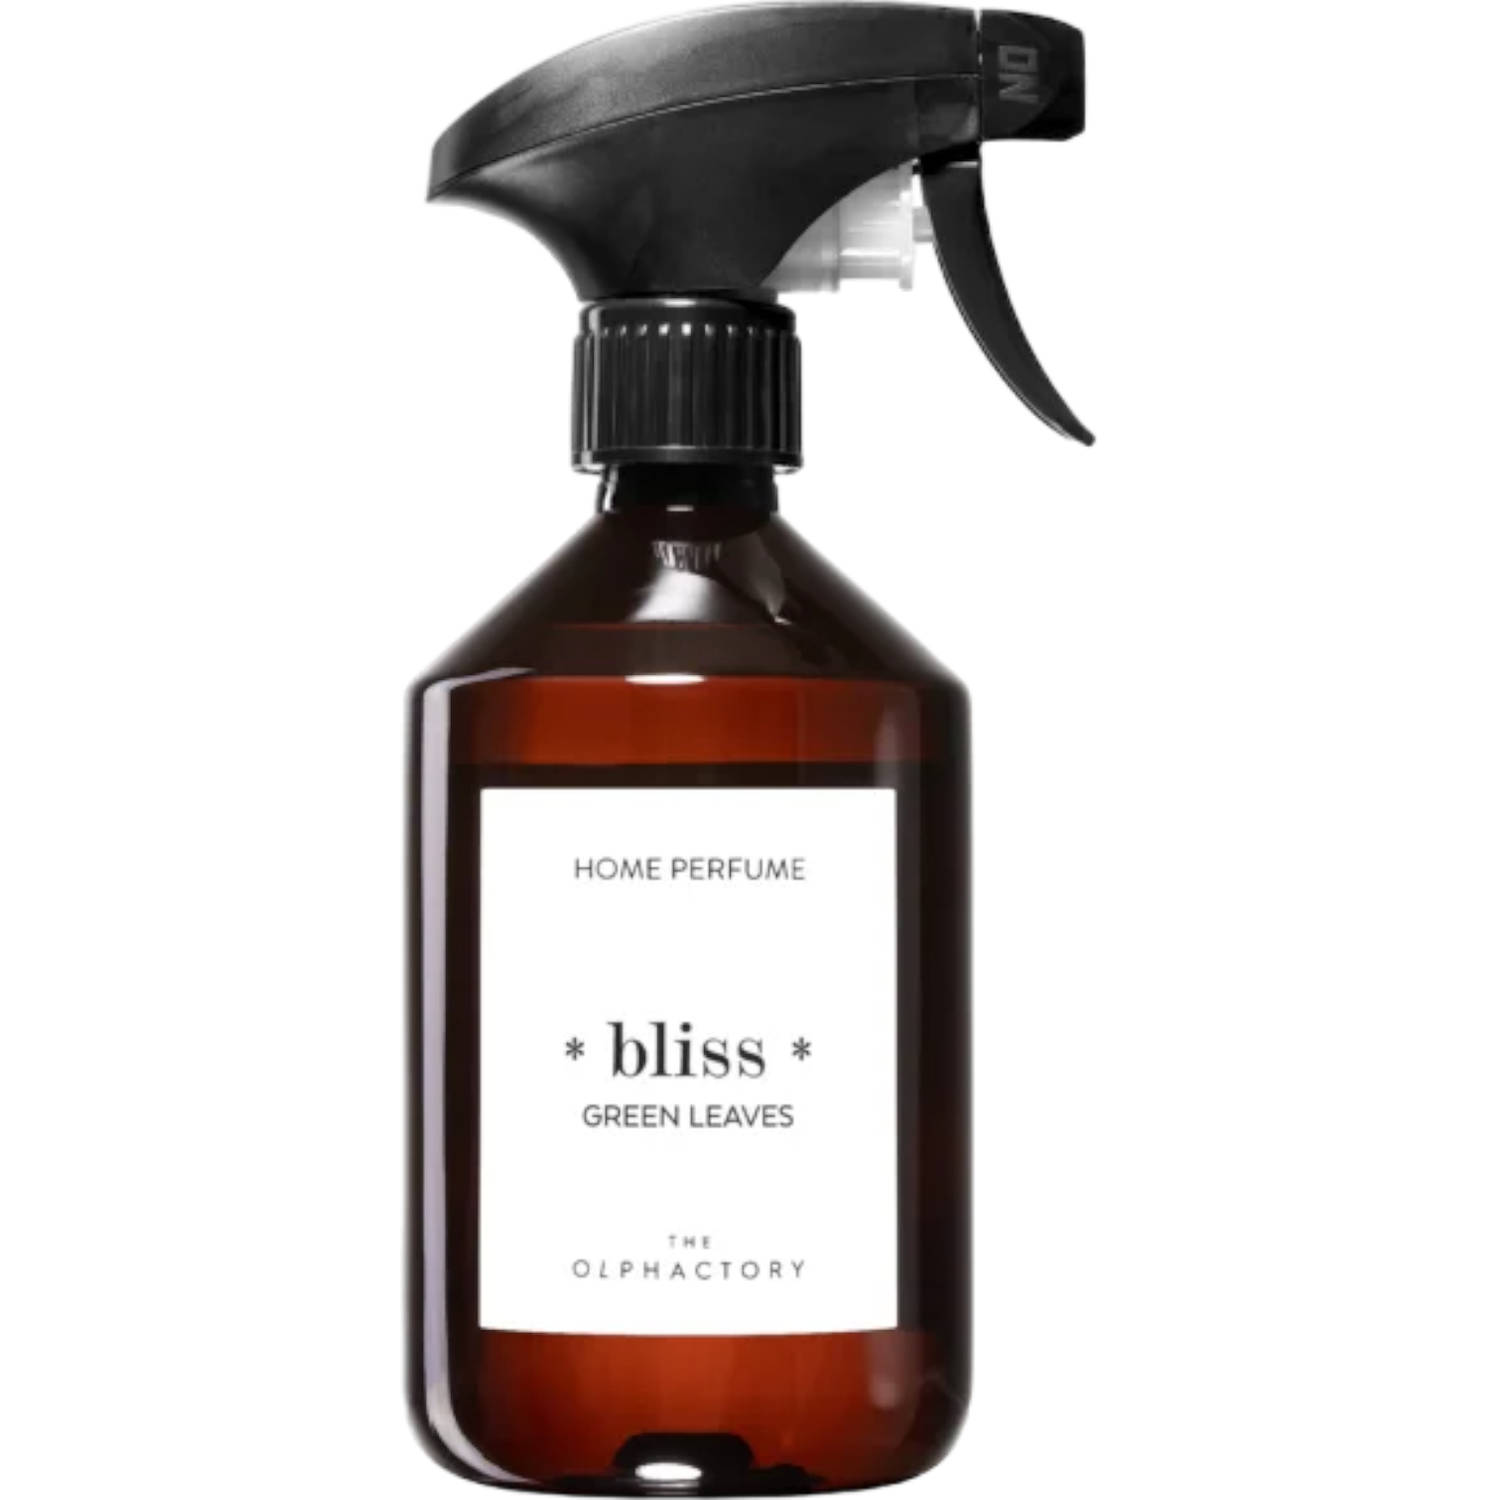 The olphactory roomspray bliss